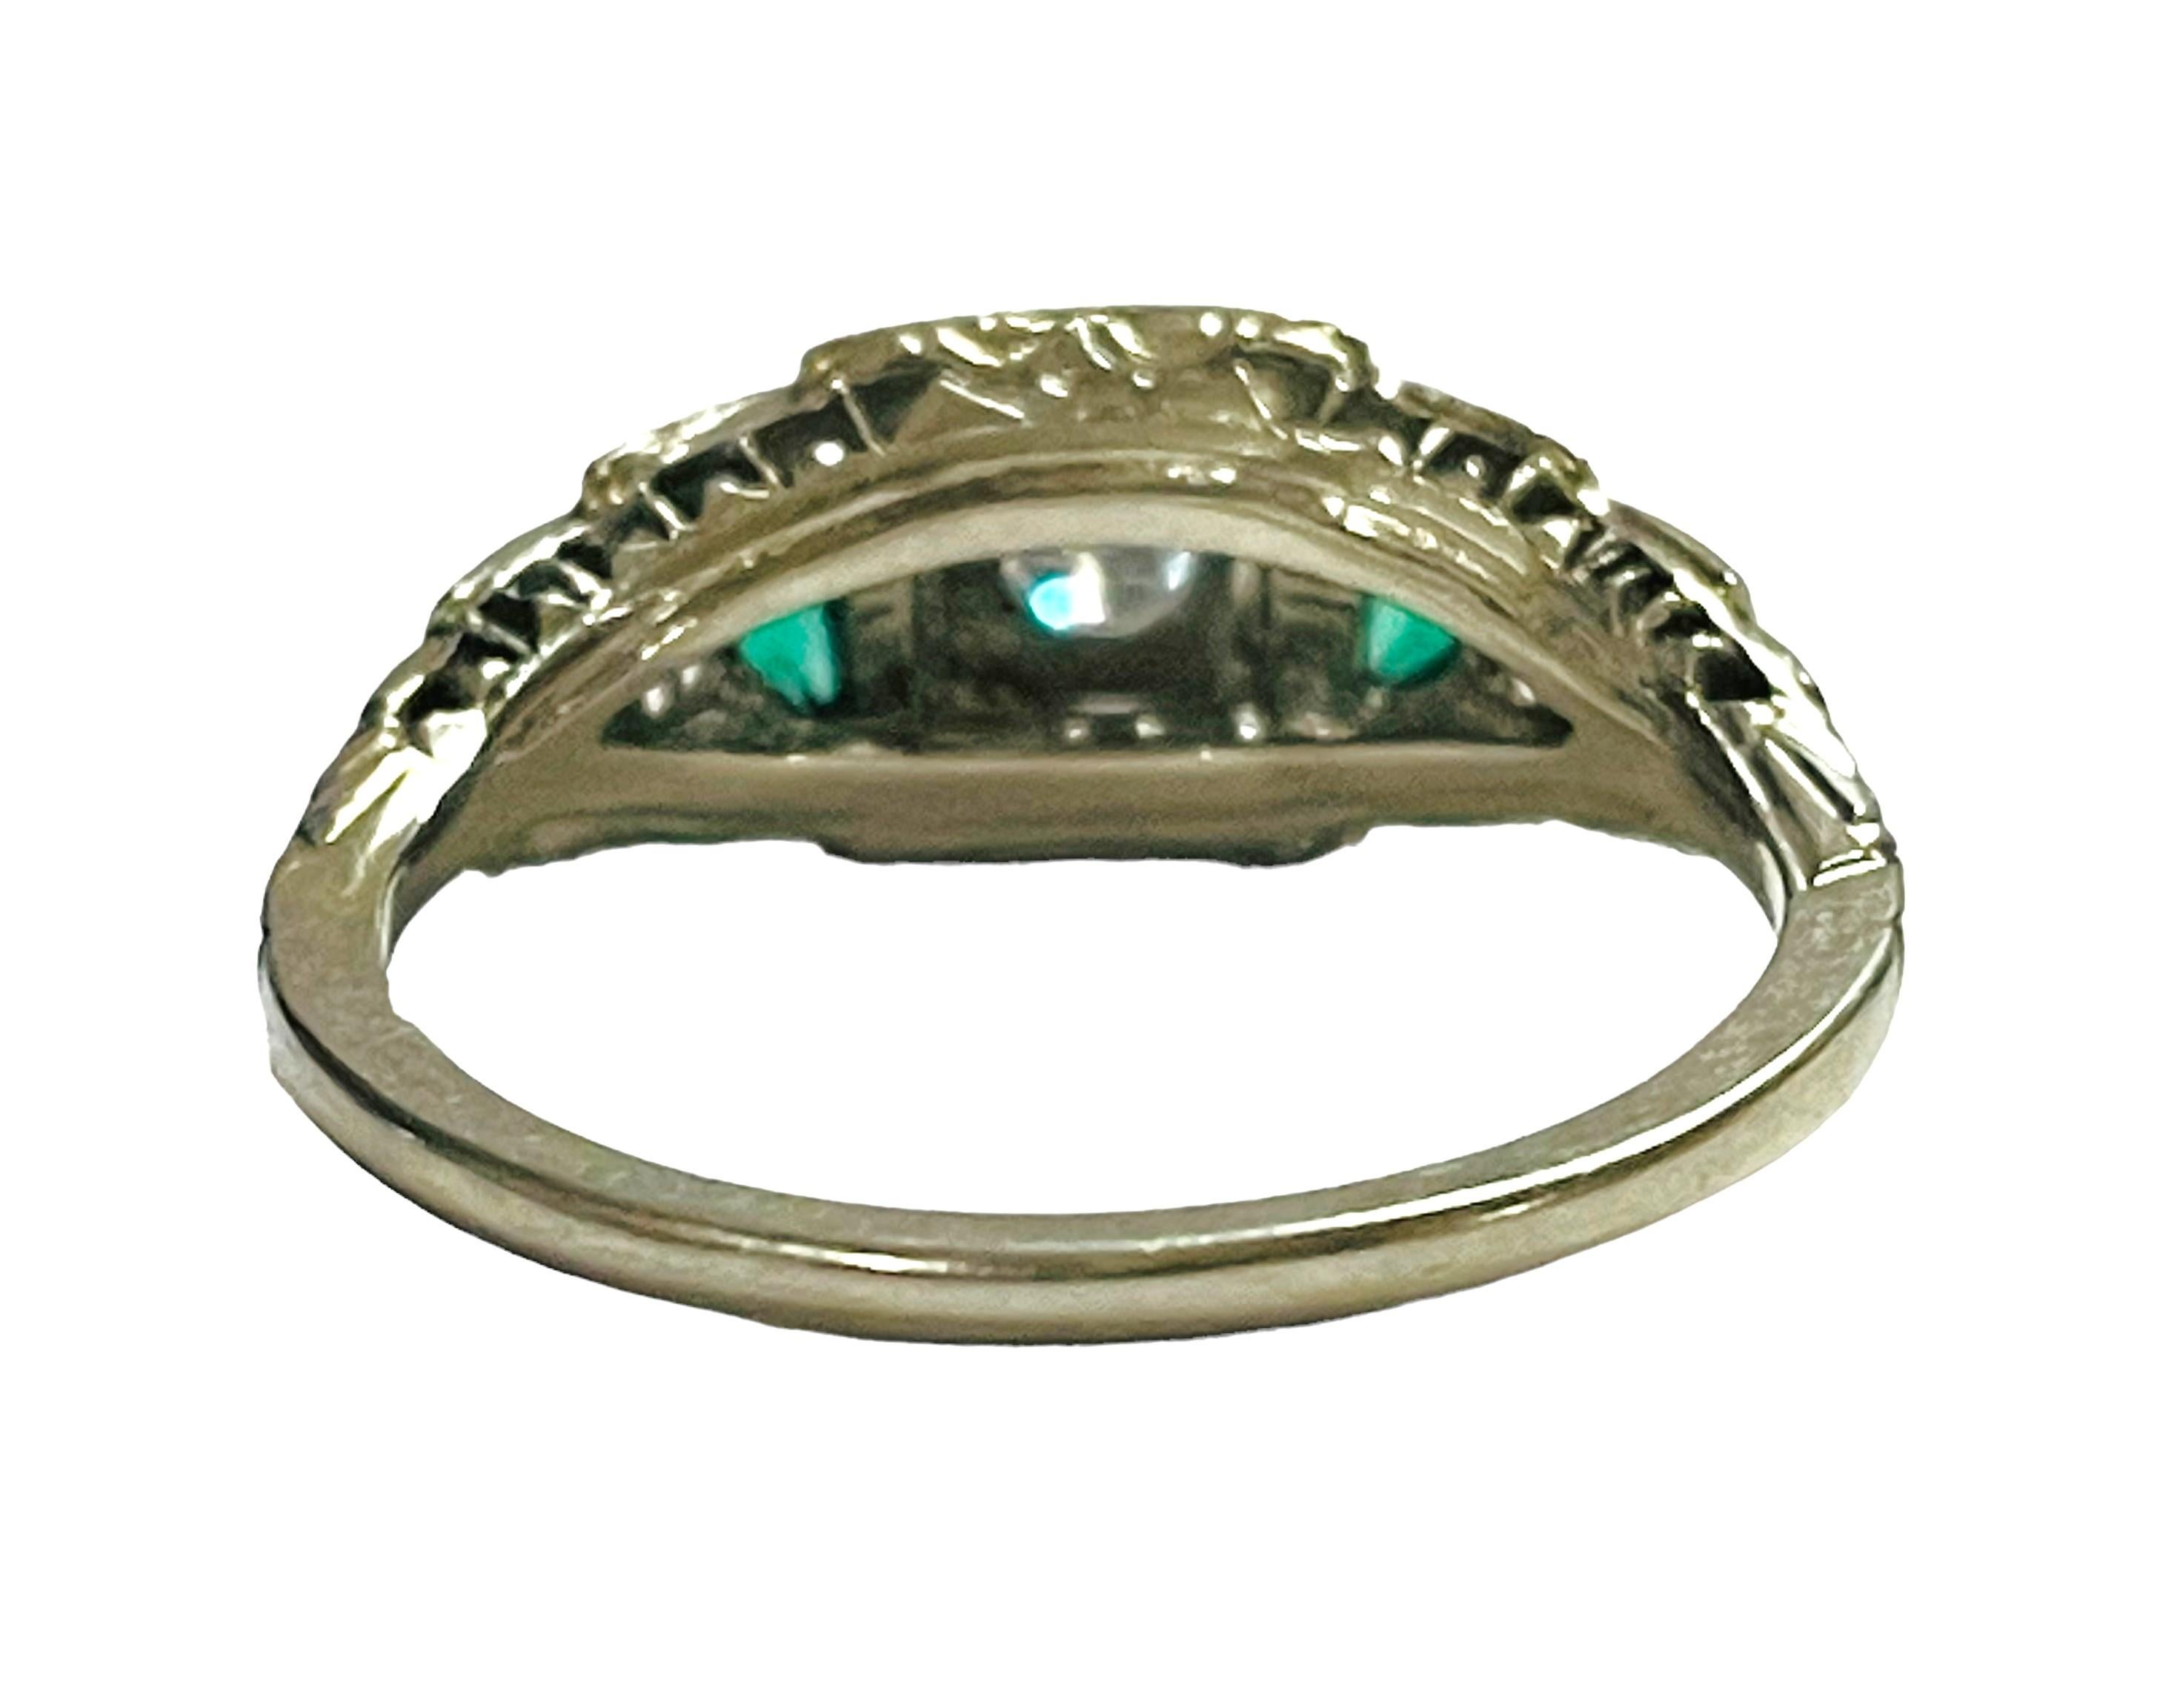 Women's Vintage 18K White Gold Diamond and Emerald Ring with Appraisal